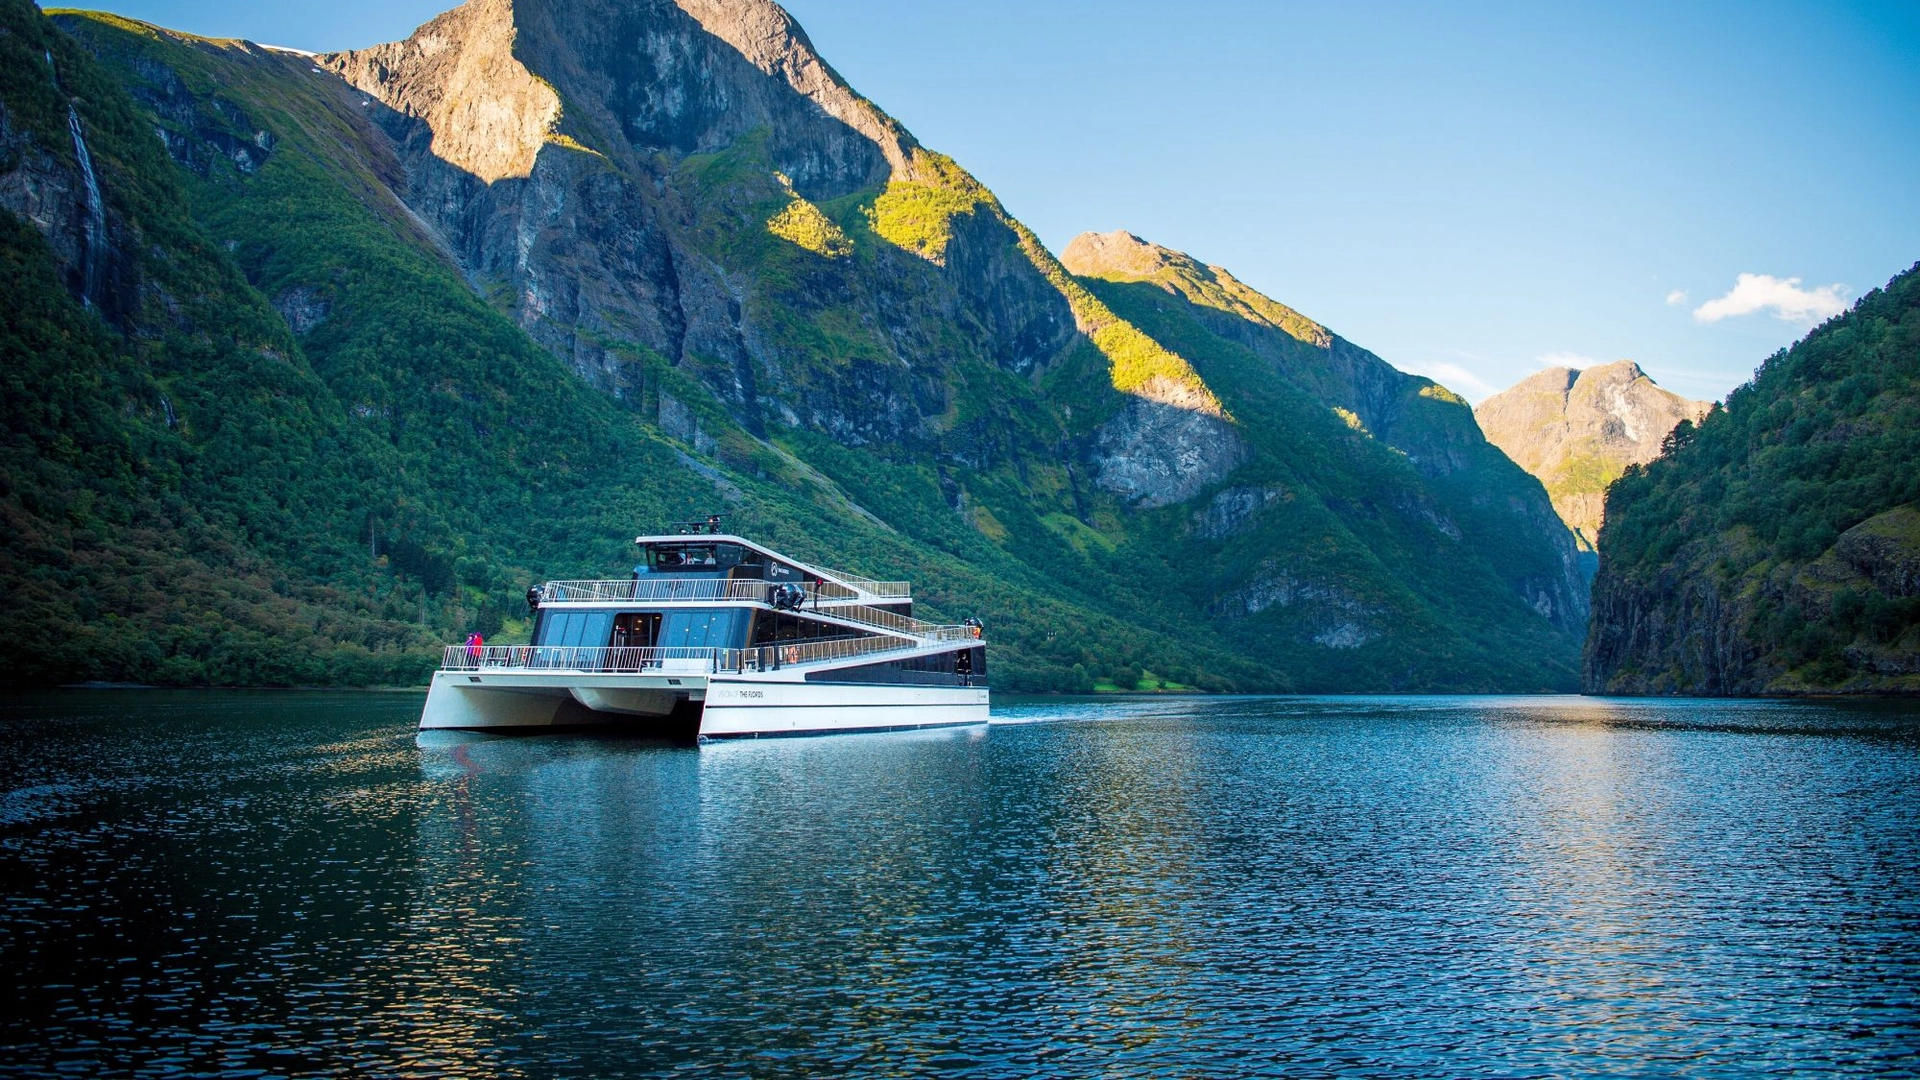 Experience the Nærøyfjord with electric "Vision of the fjords" on the Norway in a nutshell® tour by Fjord Tours